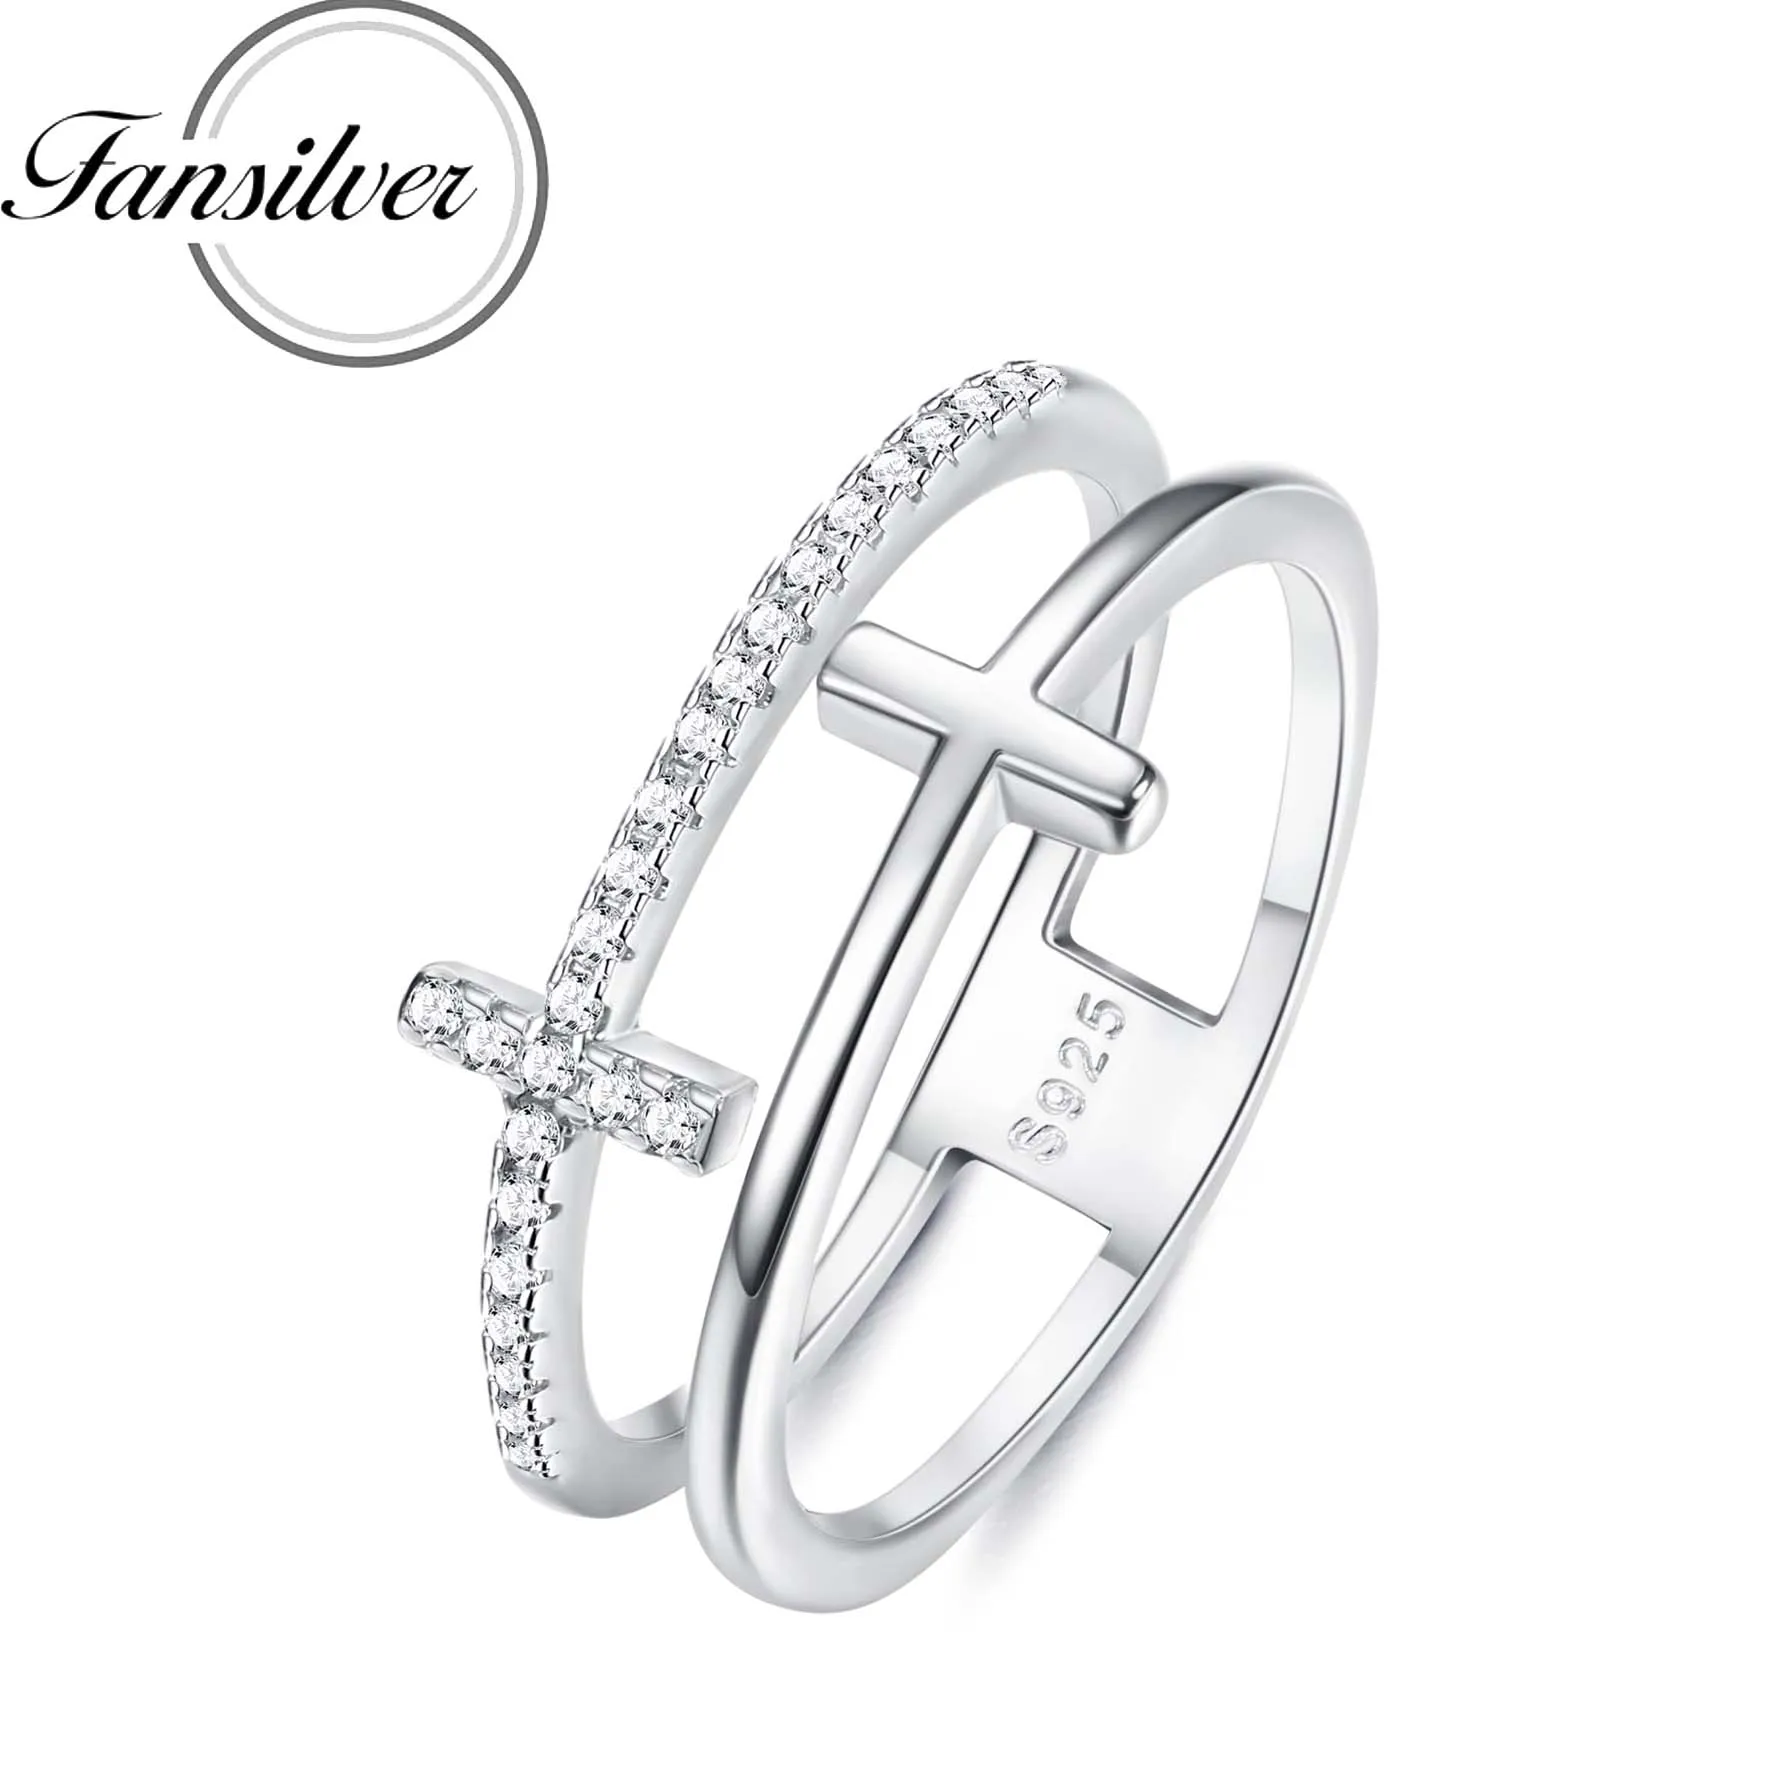 

Fansilver 925 Sterling Silver Rings 18K White Gold Plated Fashion Plain Stackable Ring Circle Rings for Women Jewelry Wholesale